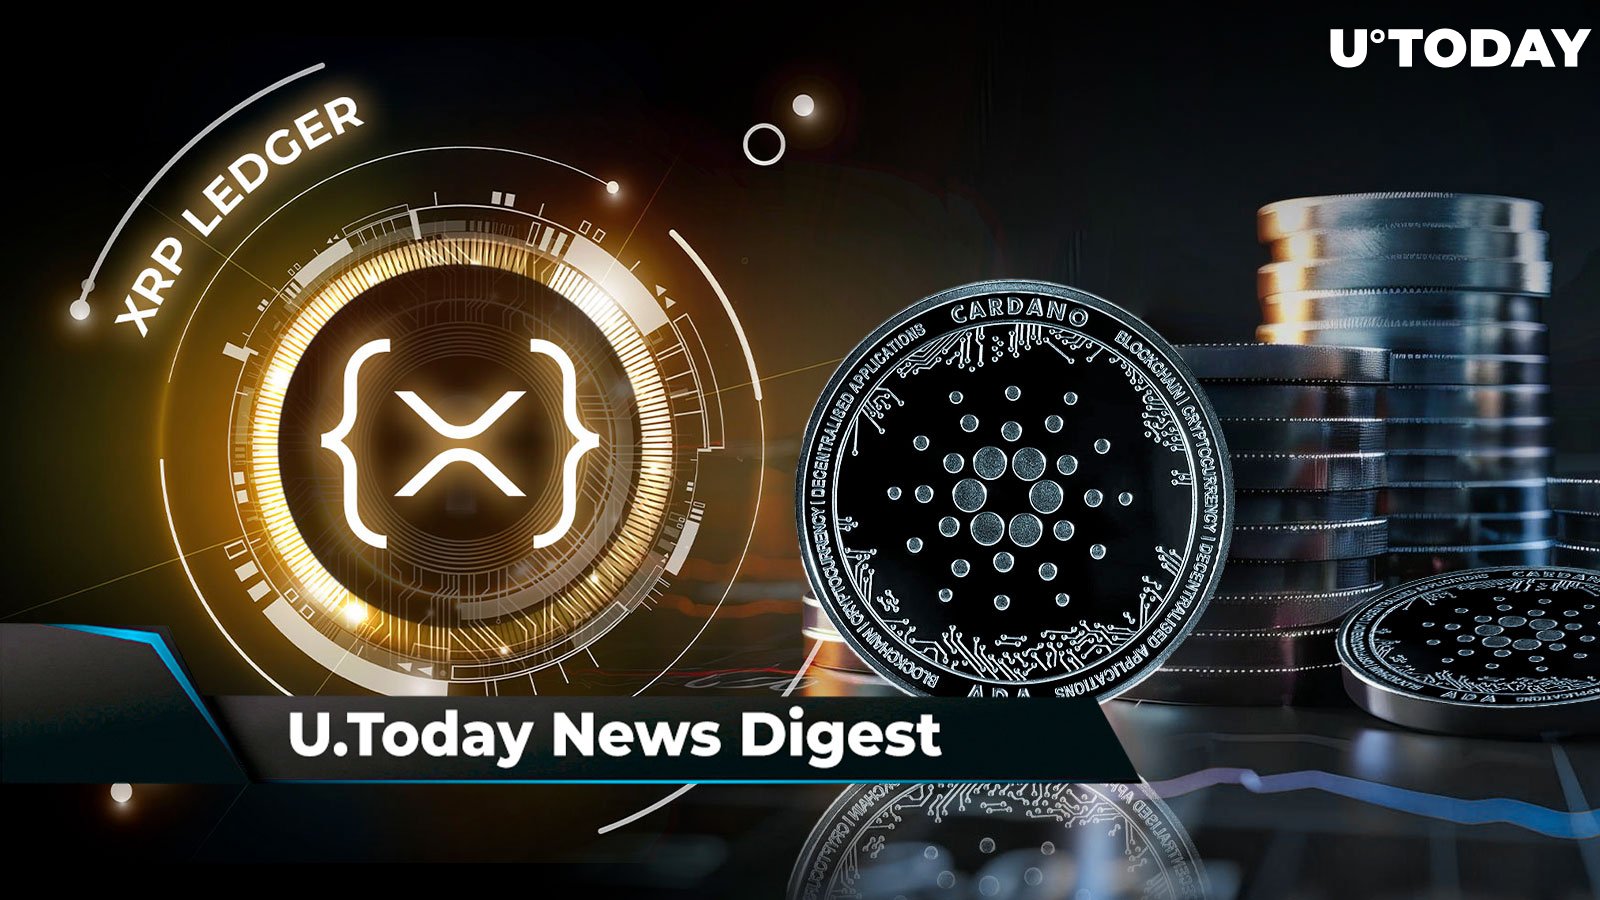 XRP Ledger Ready to Adopt Tokenized Gold, Silver in Q3, 2024, Cardano on Verge of "Most Significant" Milestone in Its History, Ancient ETH Whale Wakes Up: Crypto News Digest by U.Today